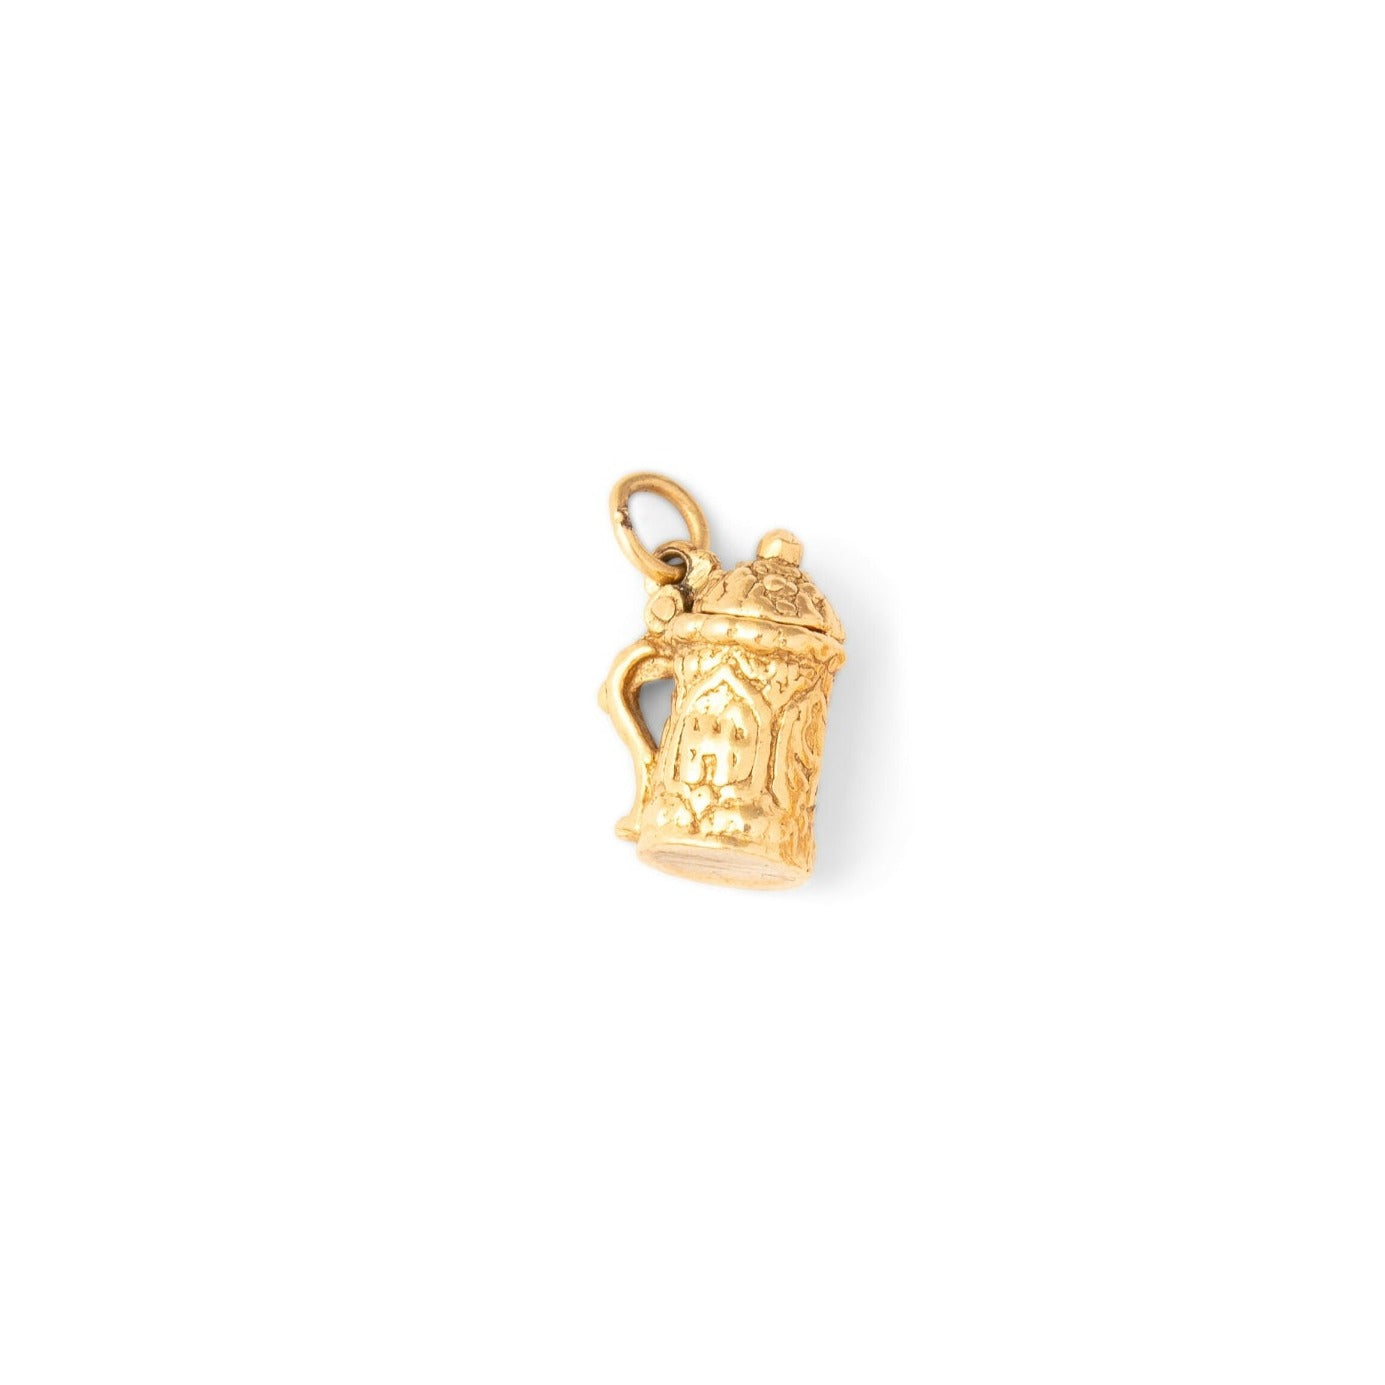 Movable Beer Stein 14K Gold Charm